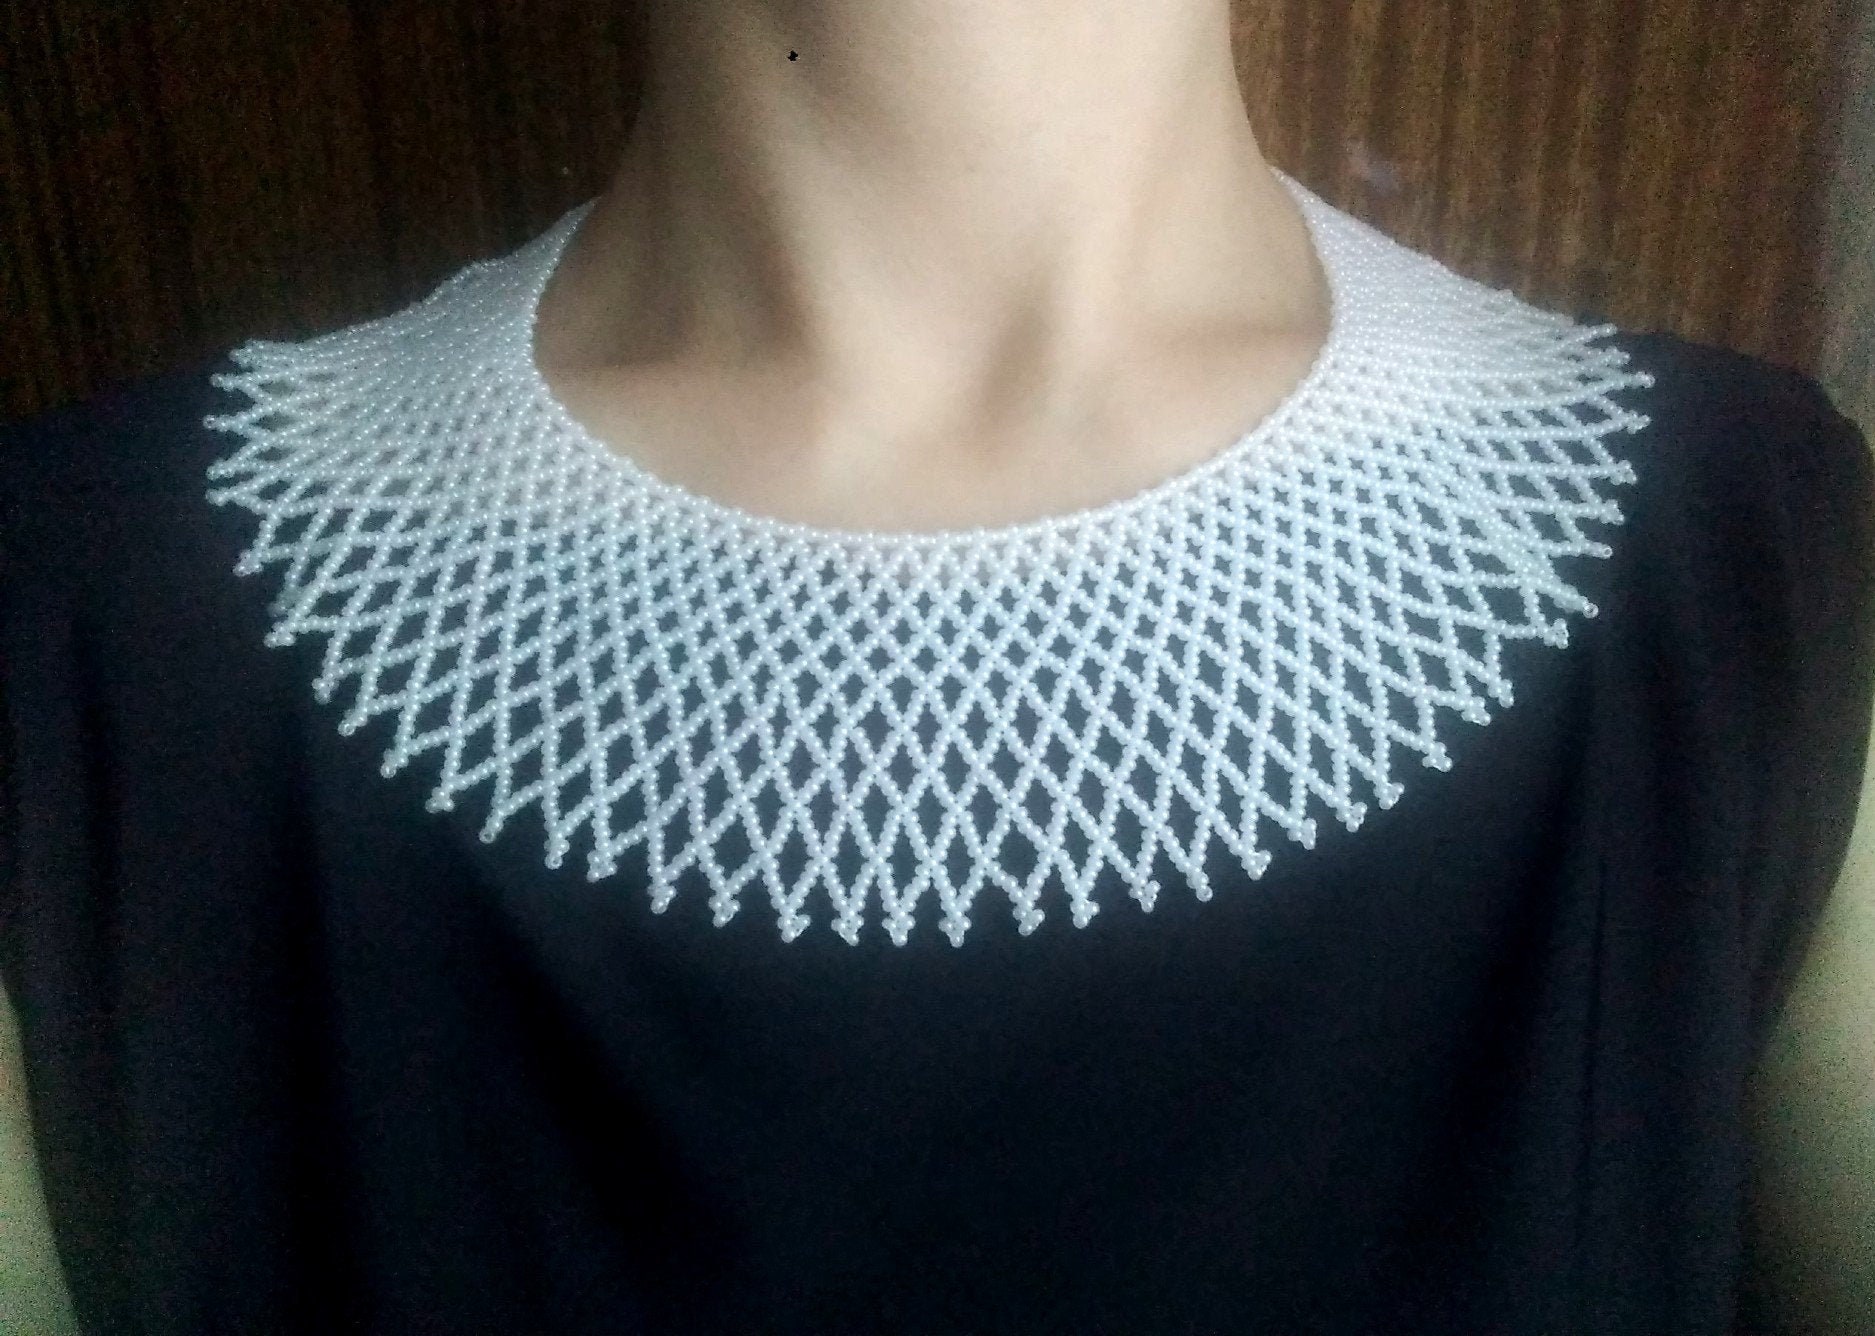 Details about   Dissent collar necklace RBG necklace White beaded necklace handmade white jewelr 